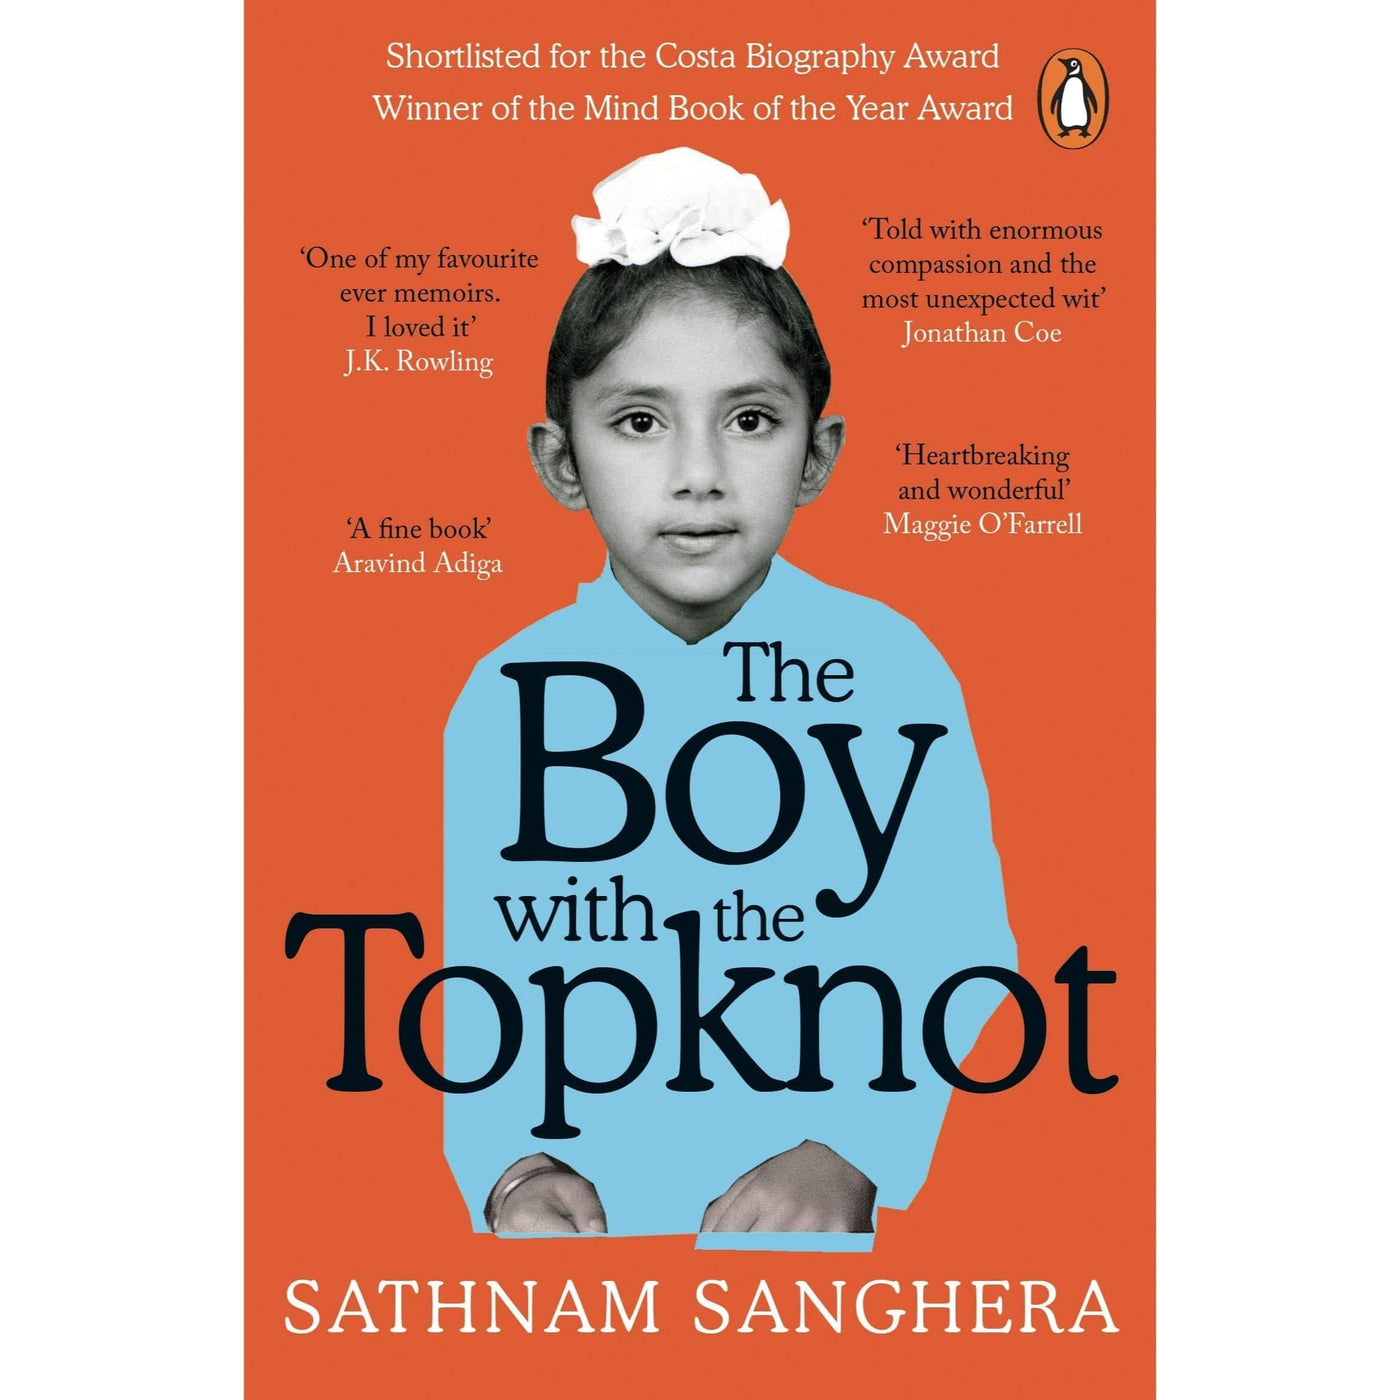 Sathnam Sanghera: The Boy with the Topknot